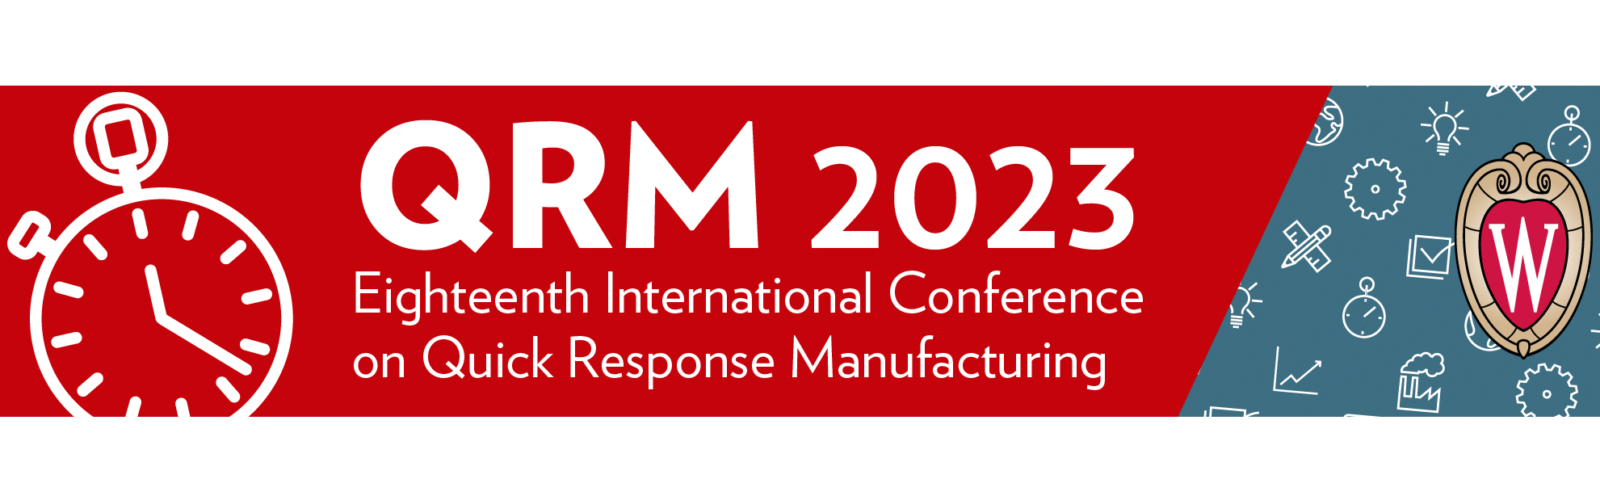 2023 International Conference on Quick Response Manufacturing